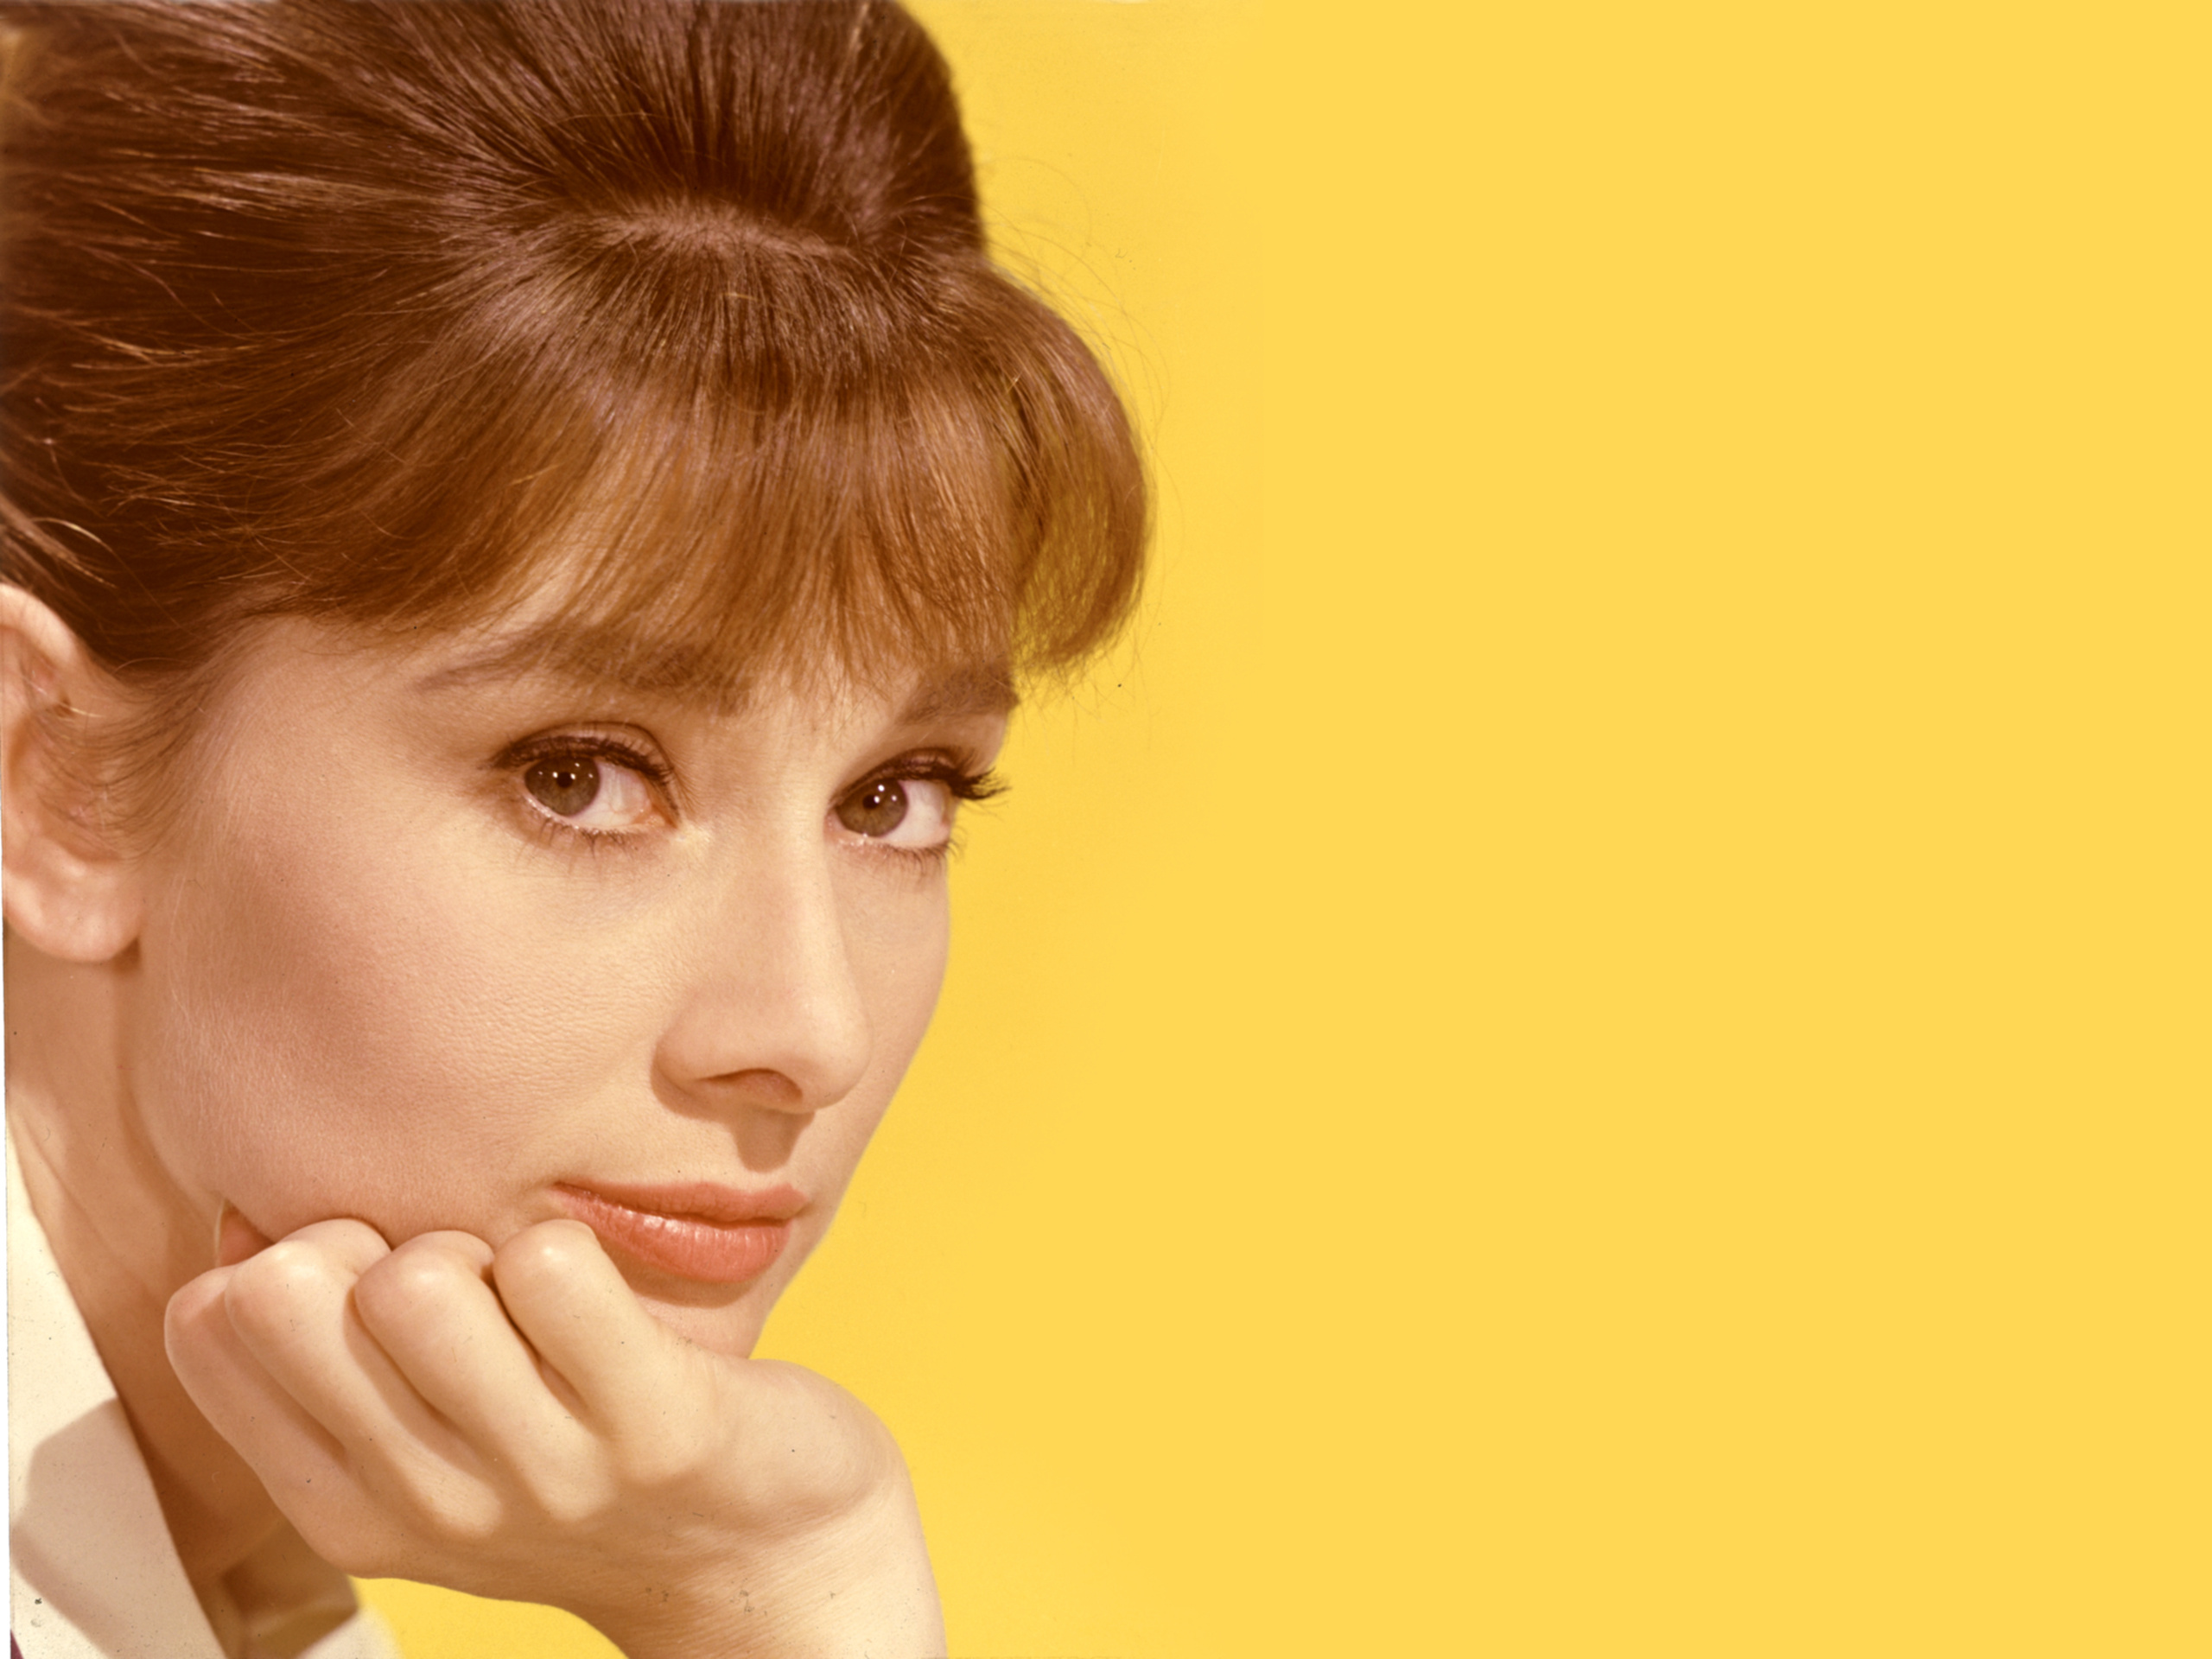 Free Audrey Hepburn wallpaper, High-resolution picture, Classic beauty, Android background, 2560x1920 HD Desktop